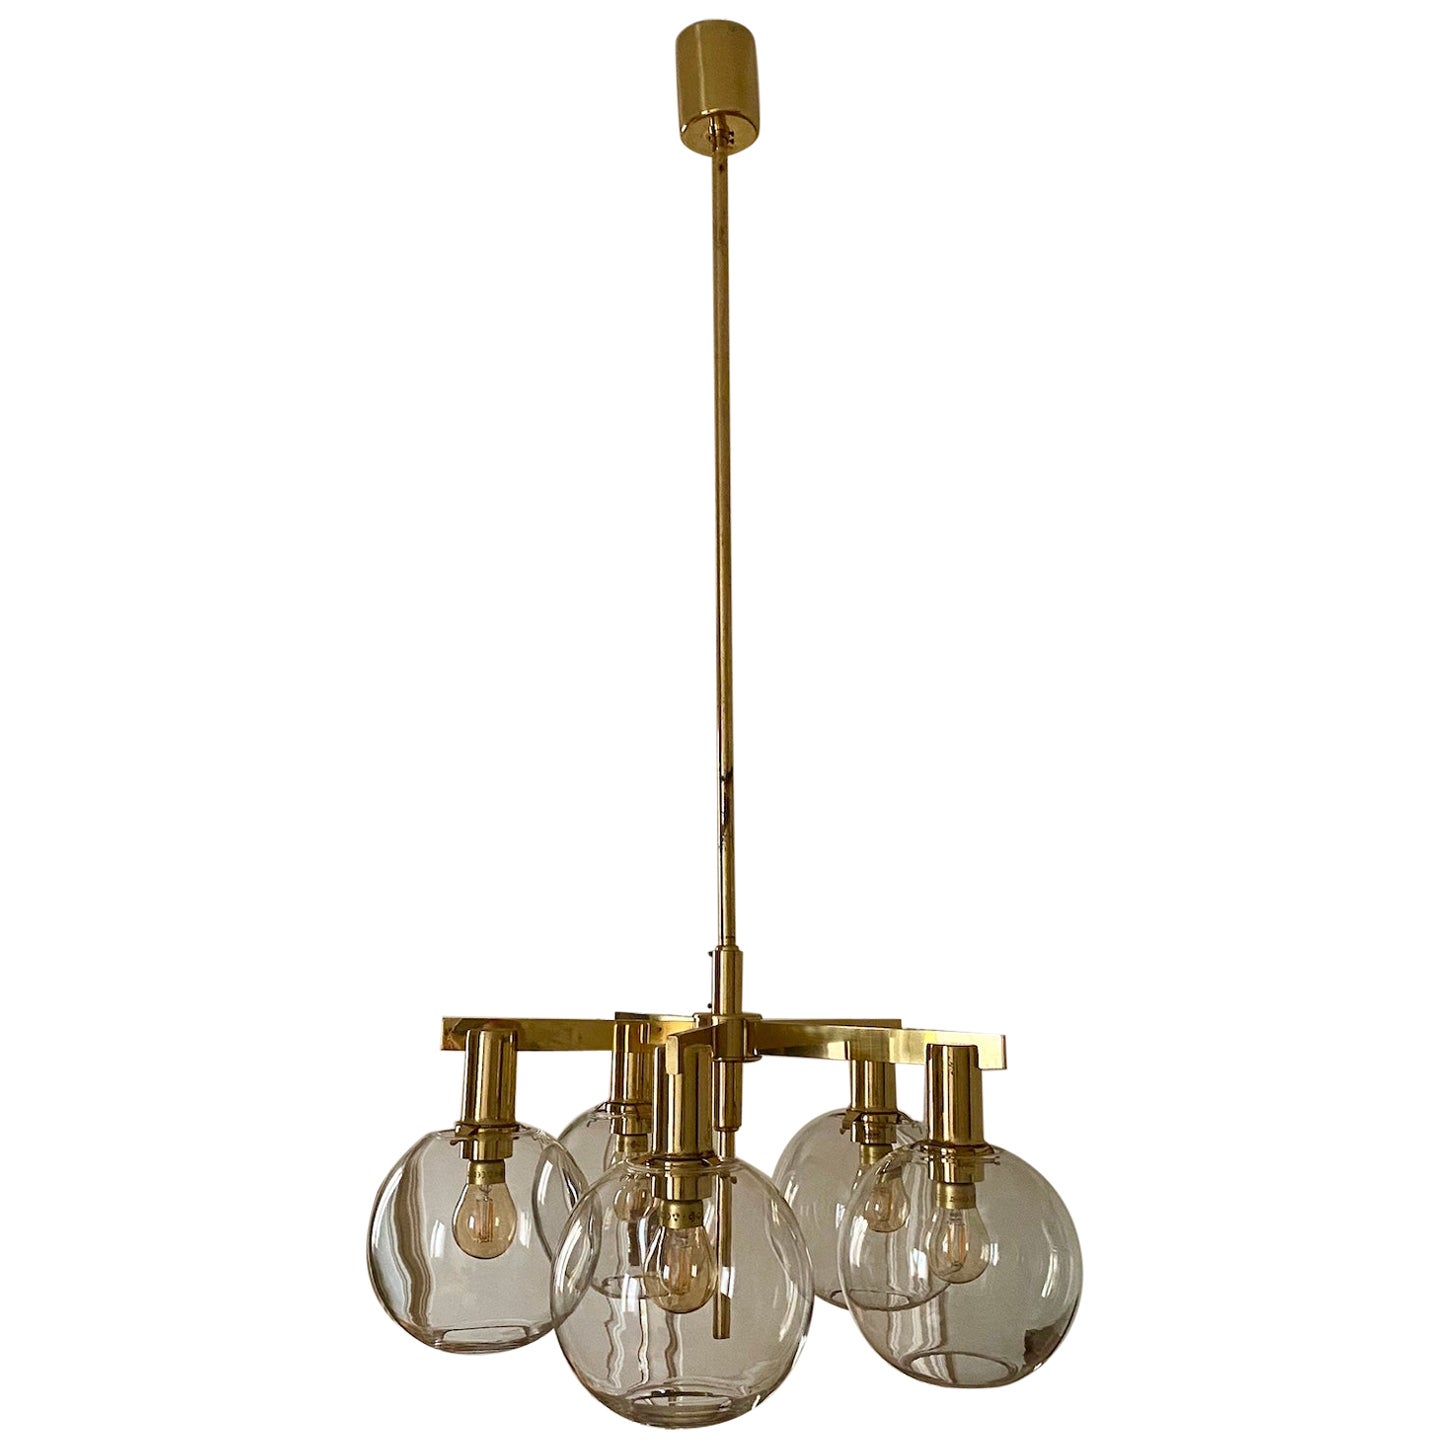 Hans-Agne Jakobsson Brass Chandelier with Five Globes